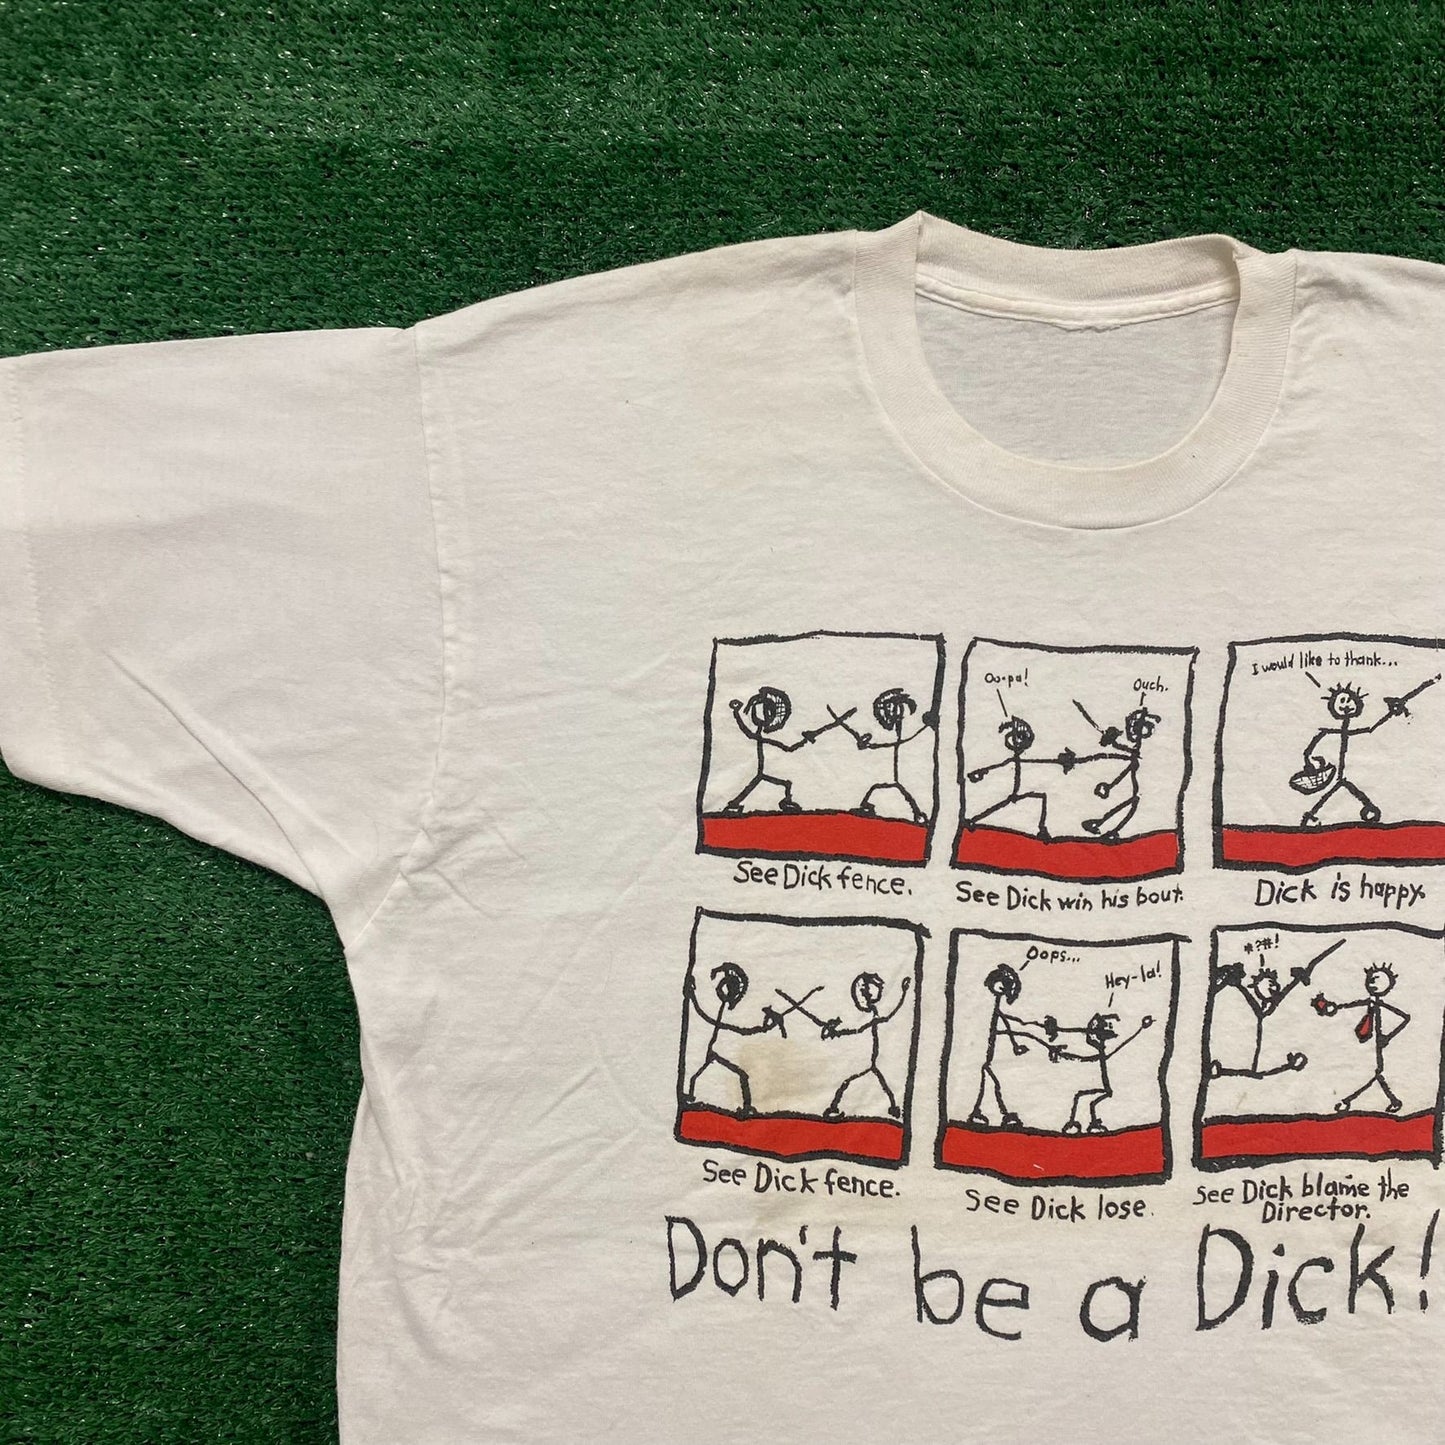 Vintage 90s Baggy Dick Fencing Comic Funny Humor T-Shirt